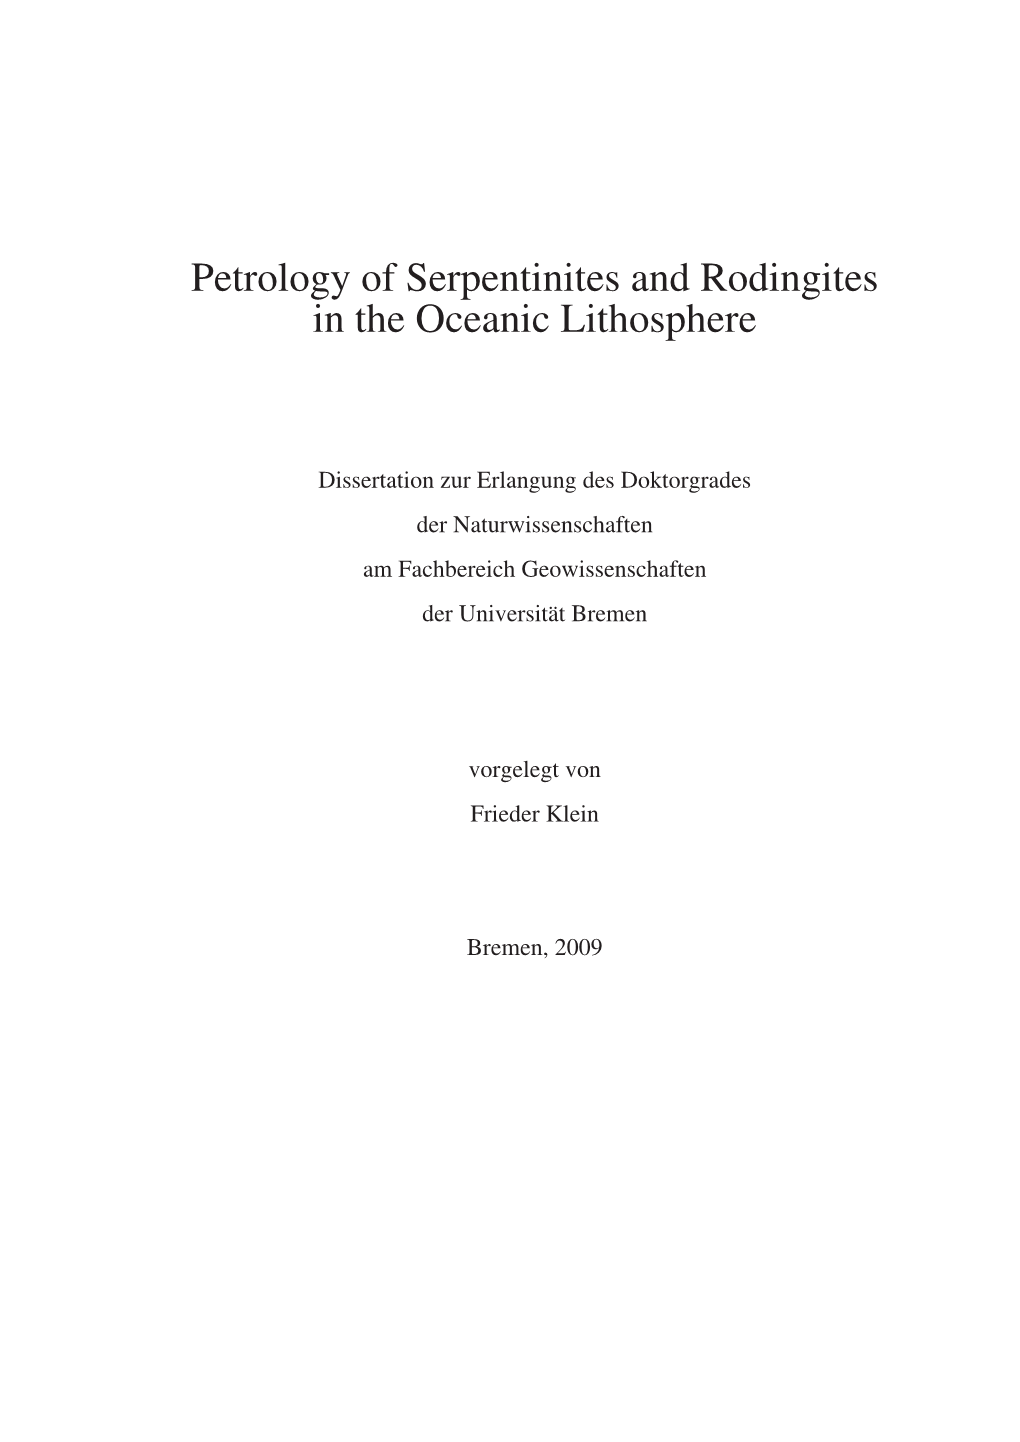 Petrology of Serpentinites and Rodingites in the Oceanic Lithosphere